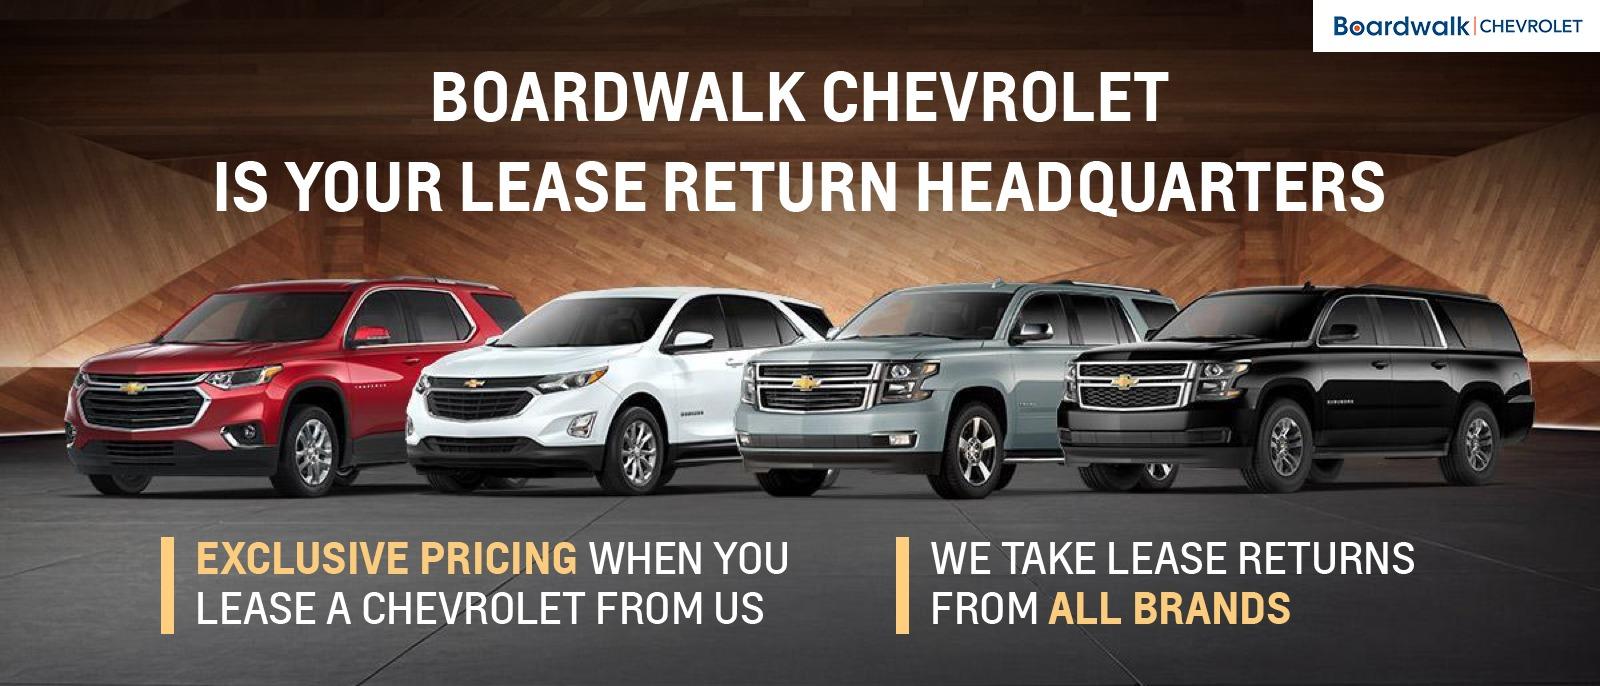 End of Lease Return Headquarters at Boardwalk Chevrolet in Redwood City